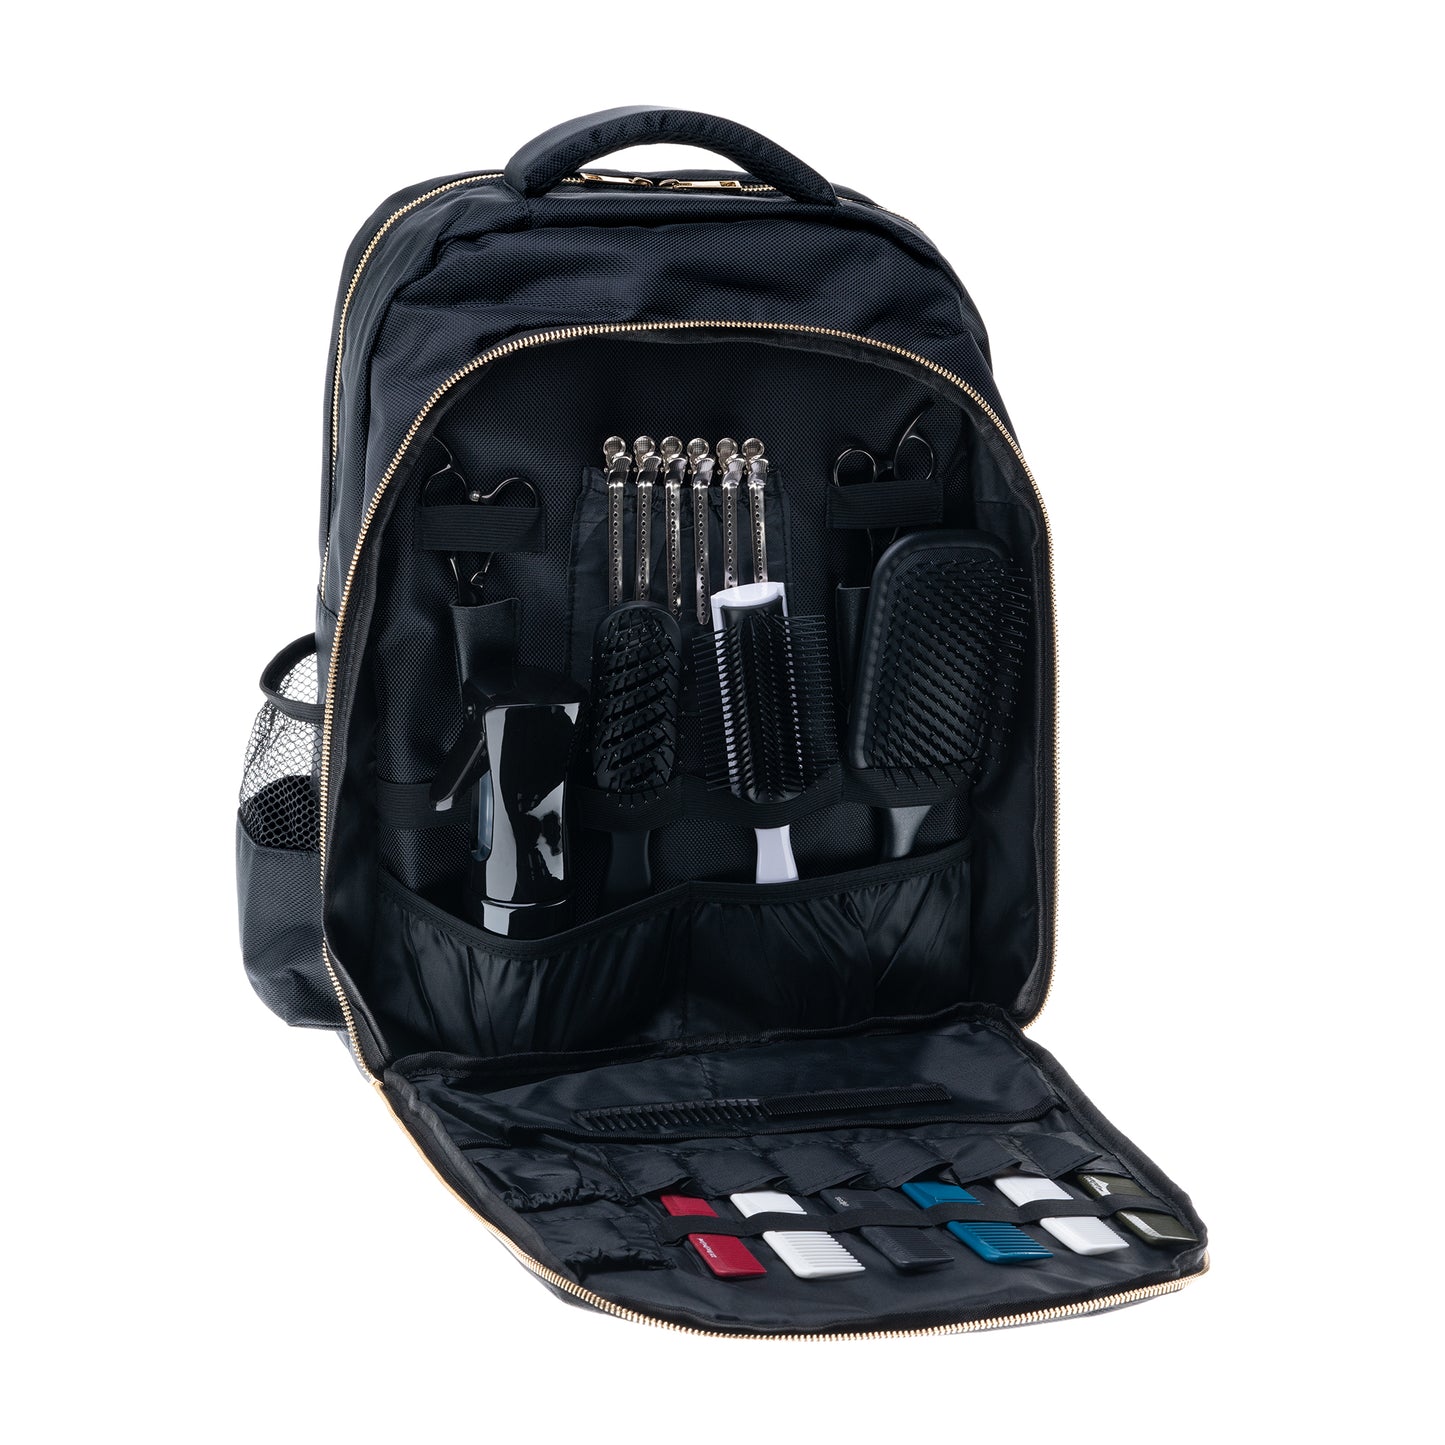 The Full Academy Backpack - Kit Included